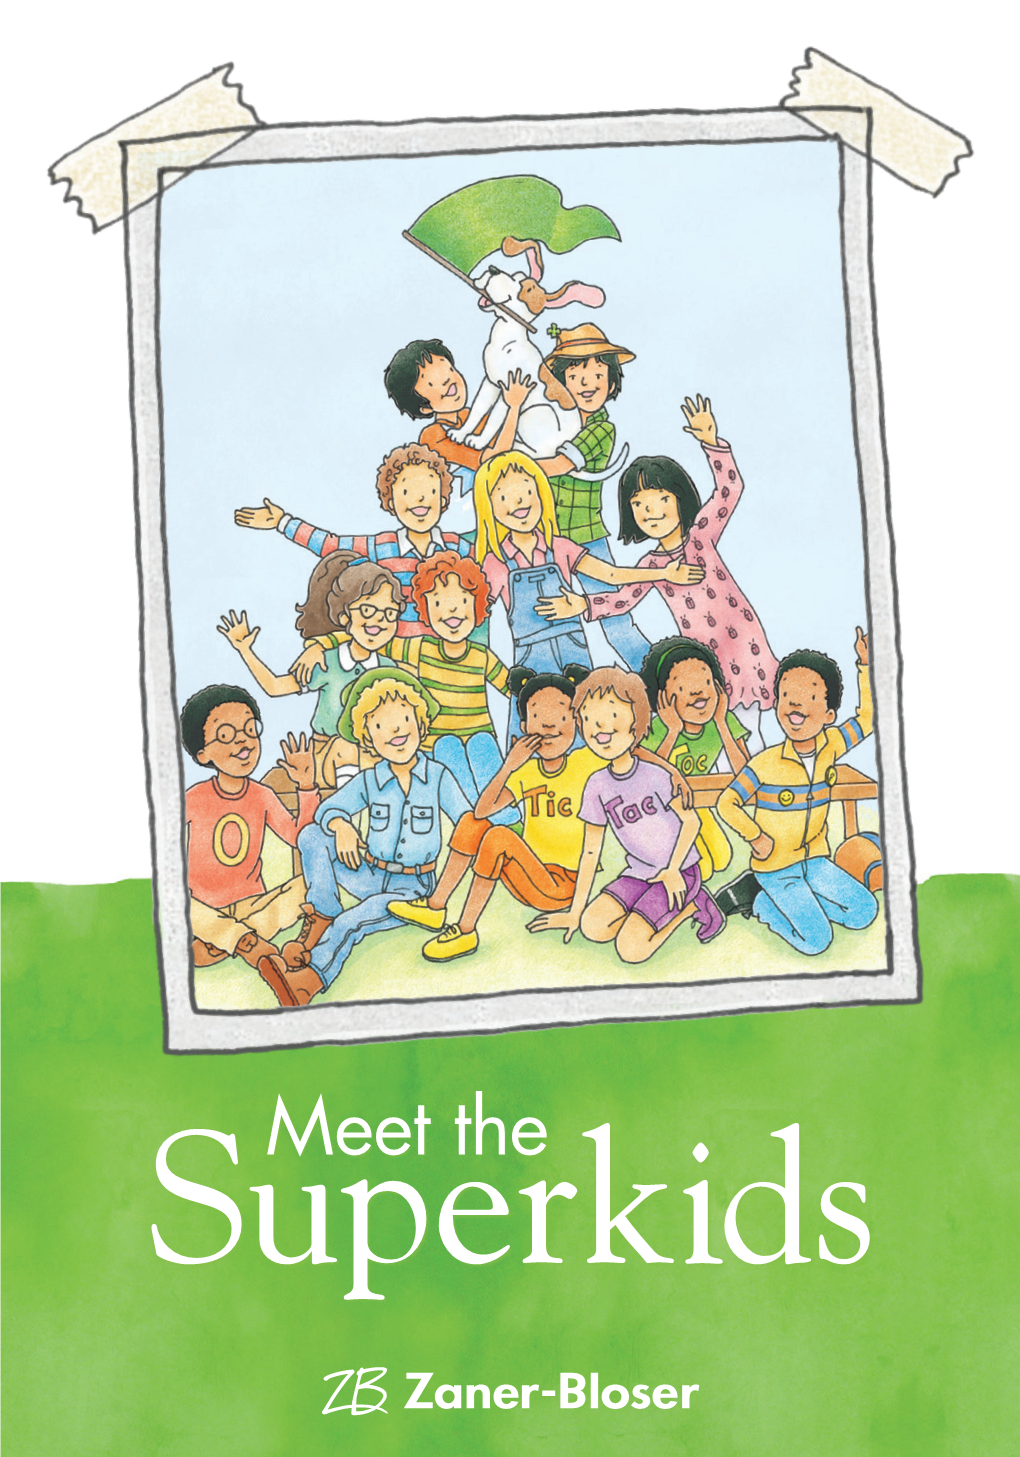 Meet the Superkids, Students Are Introduced to a New Character—Or Three, in the Case of Tic, Tac, and Toc—A Unit at a Time